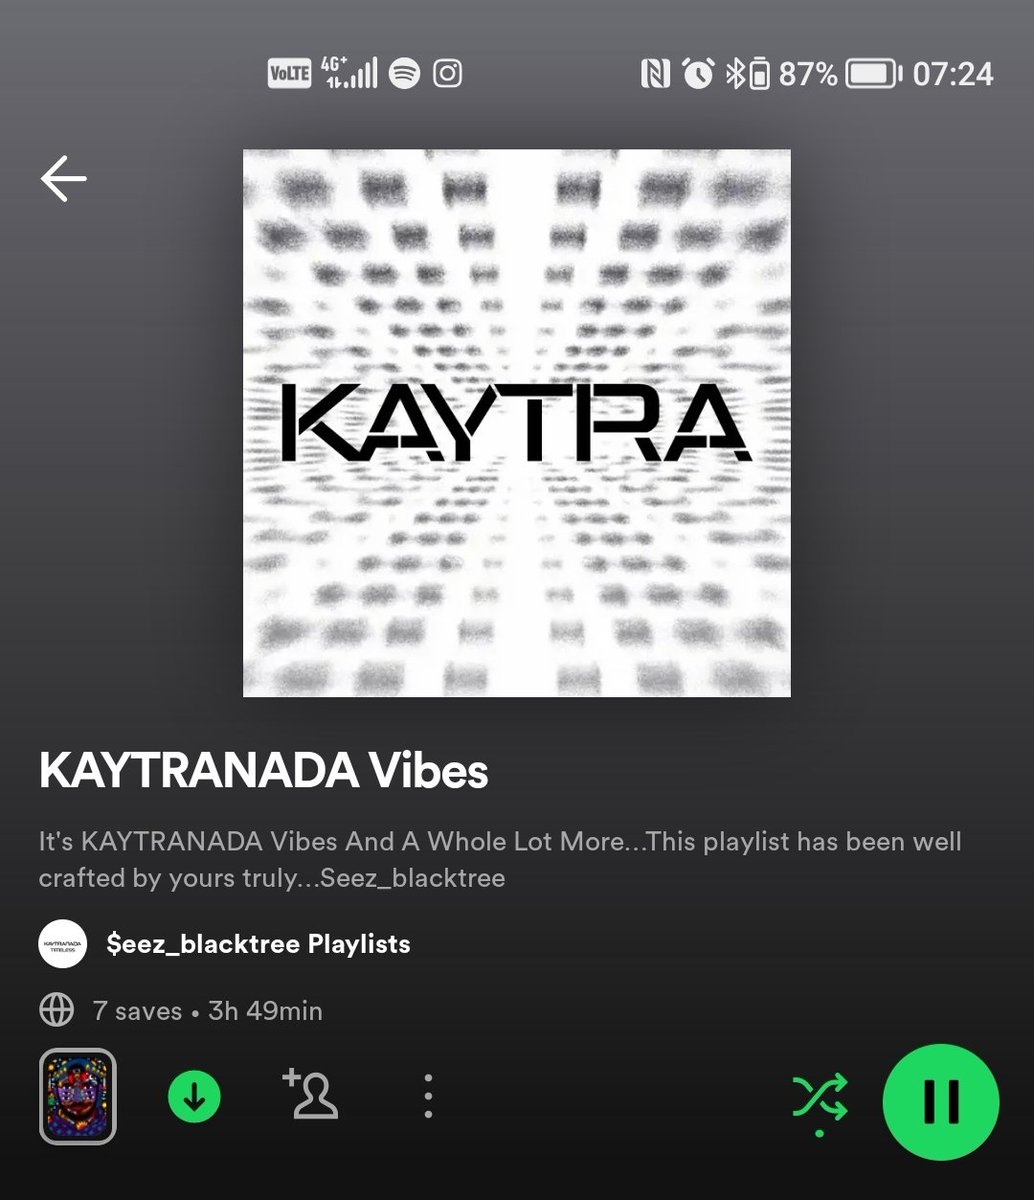 Starting my day with some KAYTRANADA Vibes ☺☺ @KAYTRANADA fans gather here

open.spotify.com/playlist/5q54p…